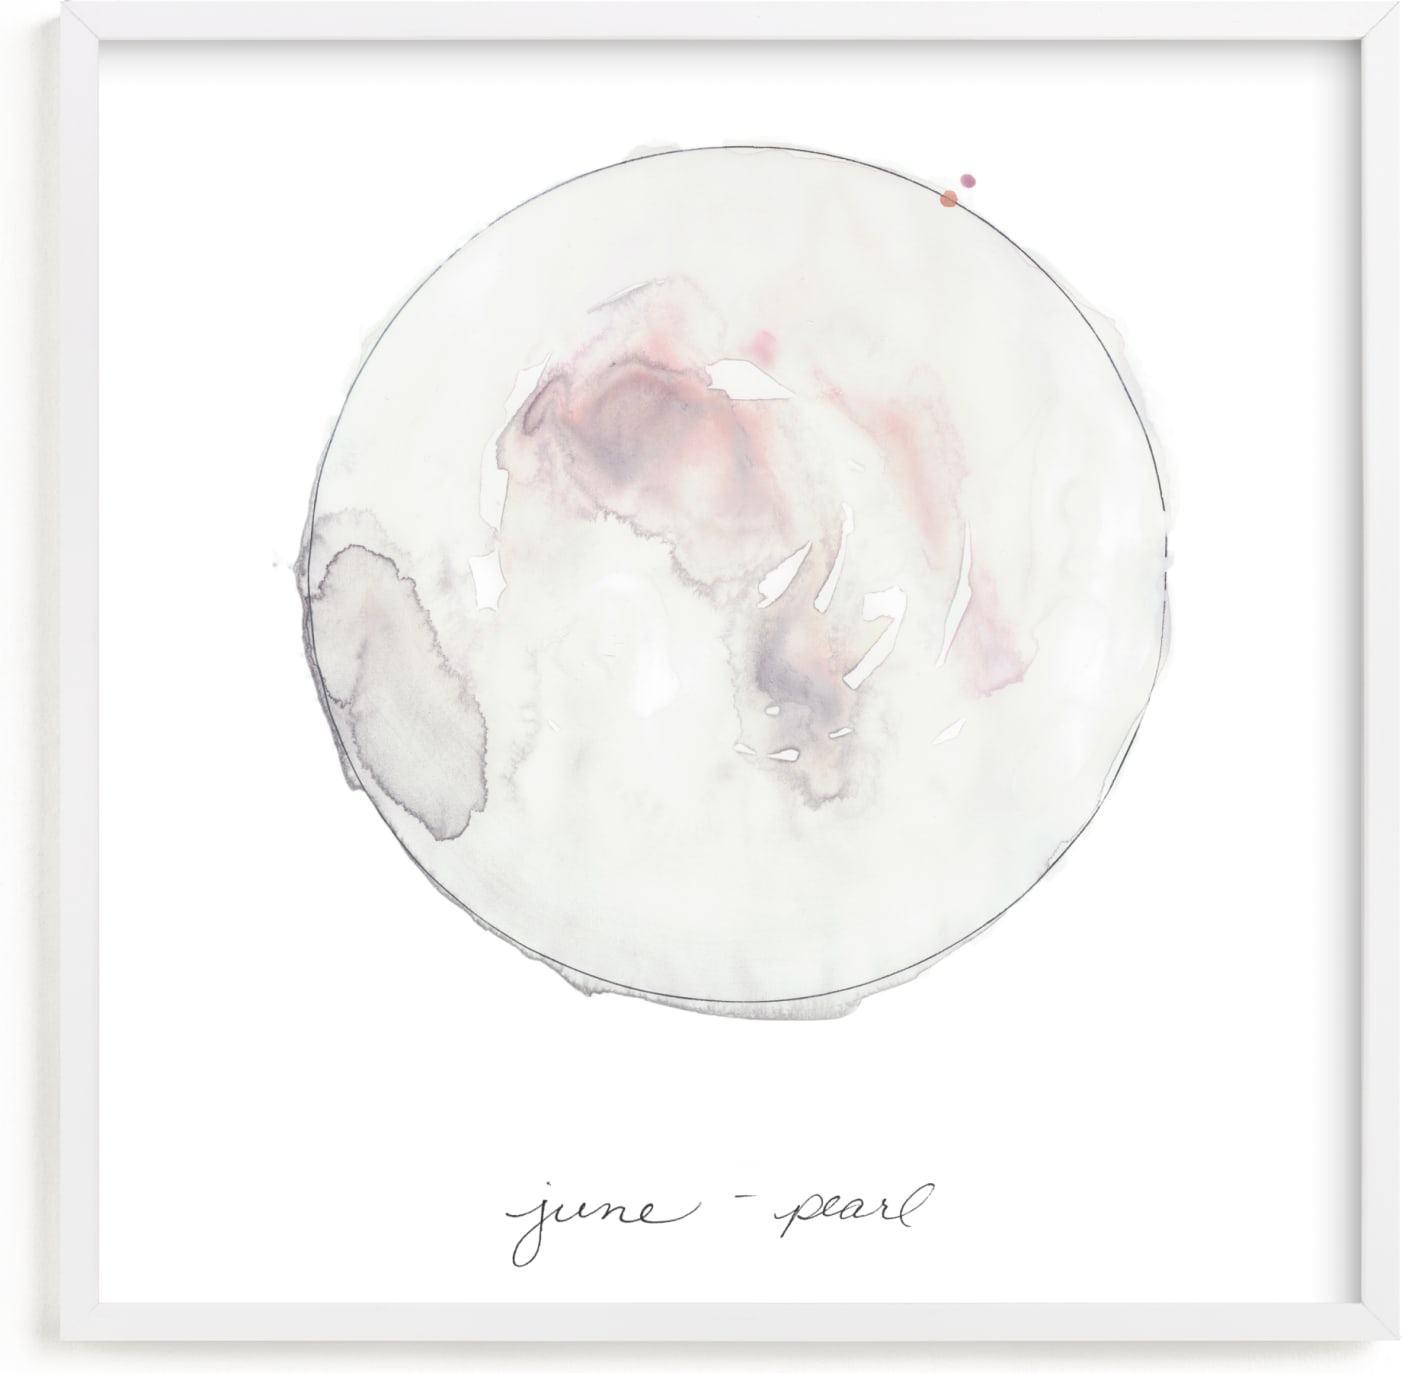 This is a white art by Naomi Ernest called June - Pearl.